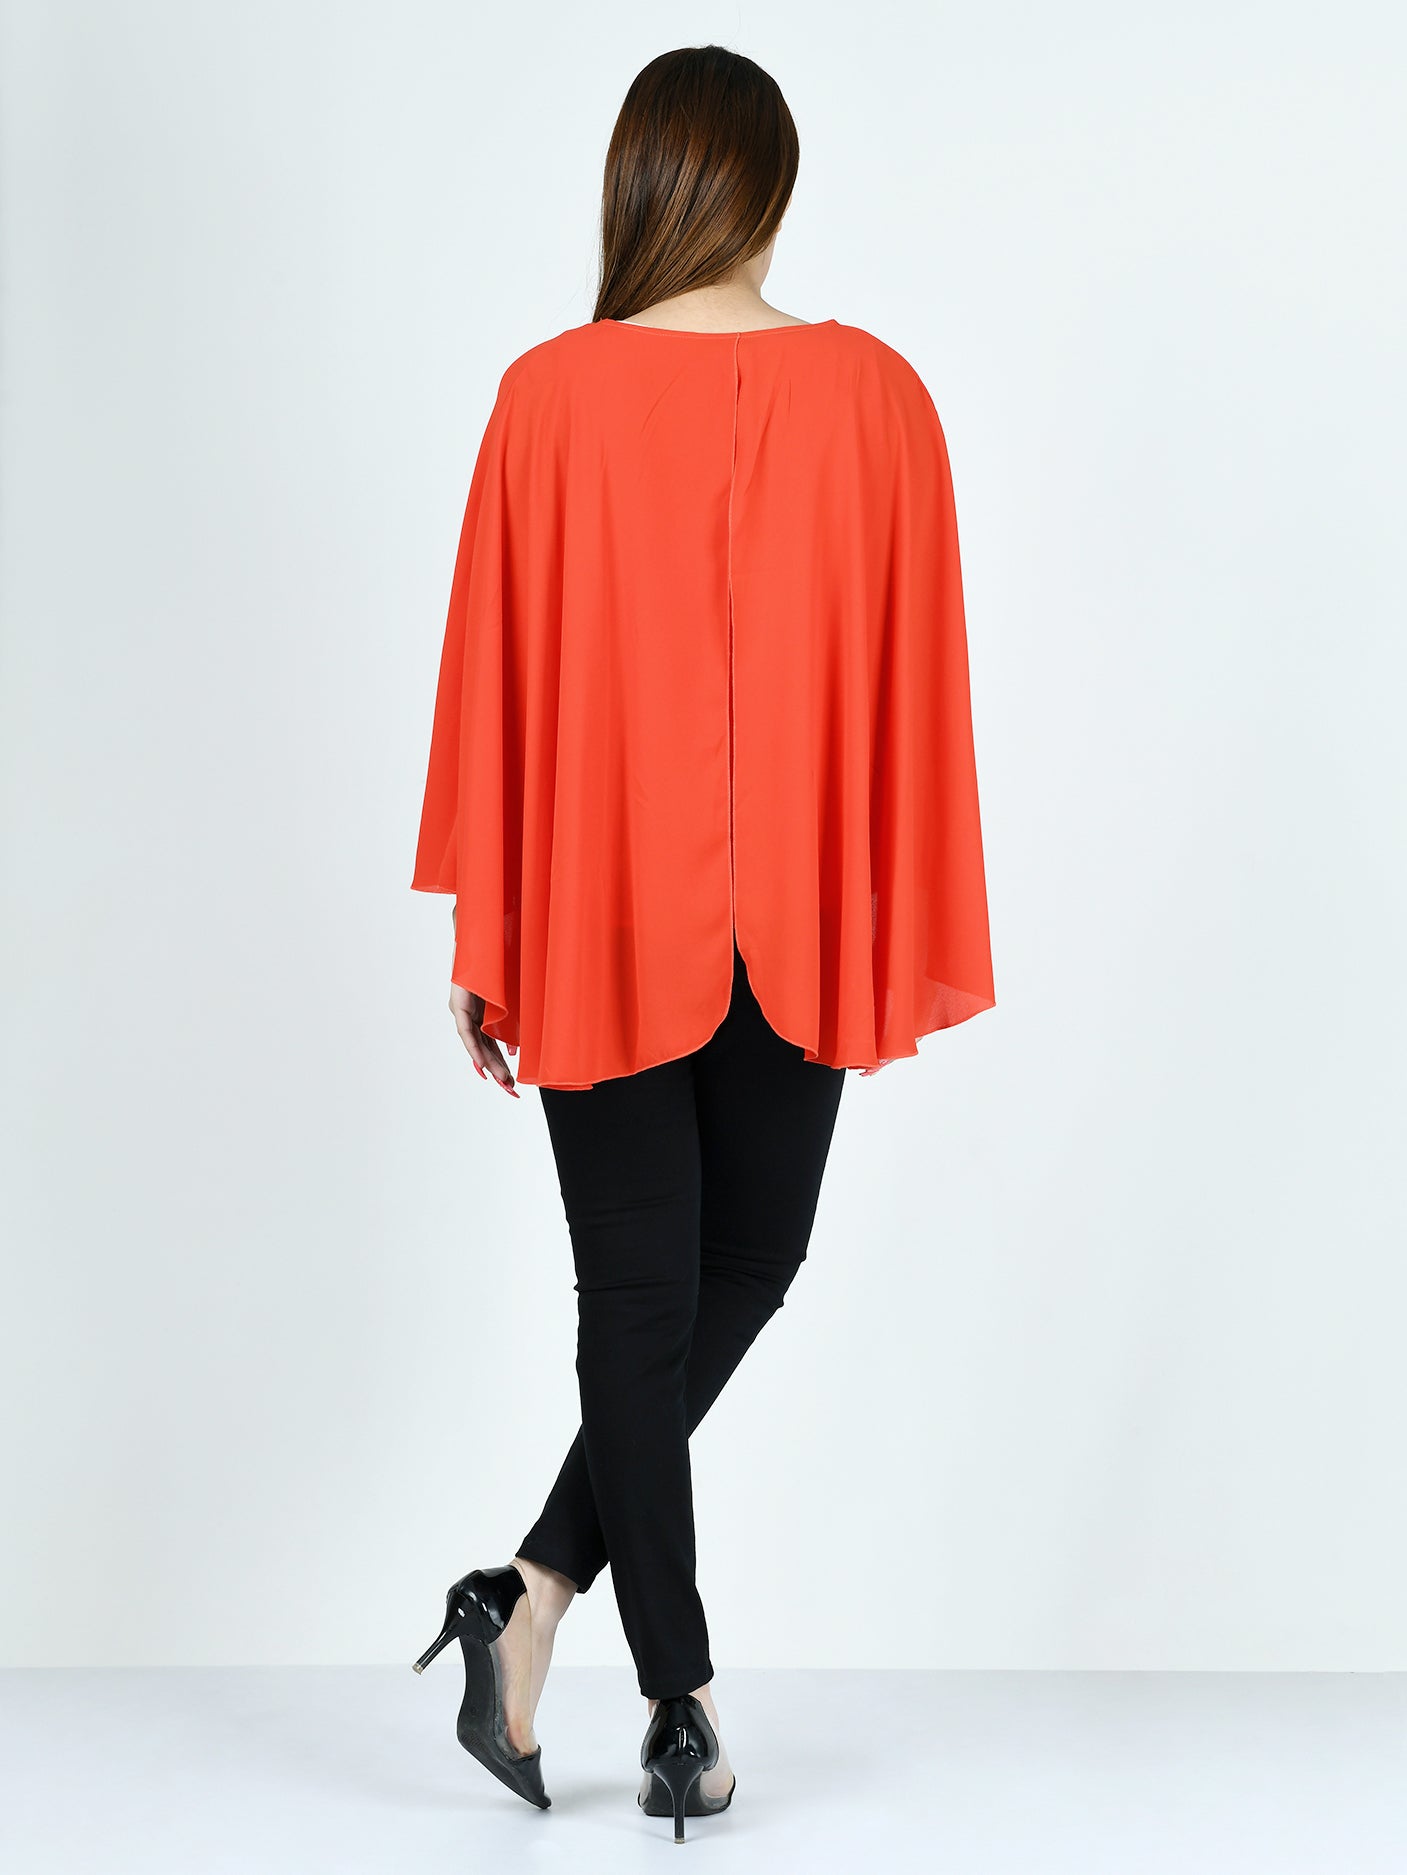 Layered Cape Style Top